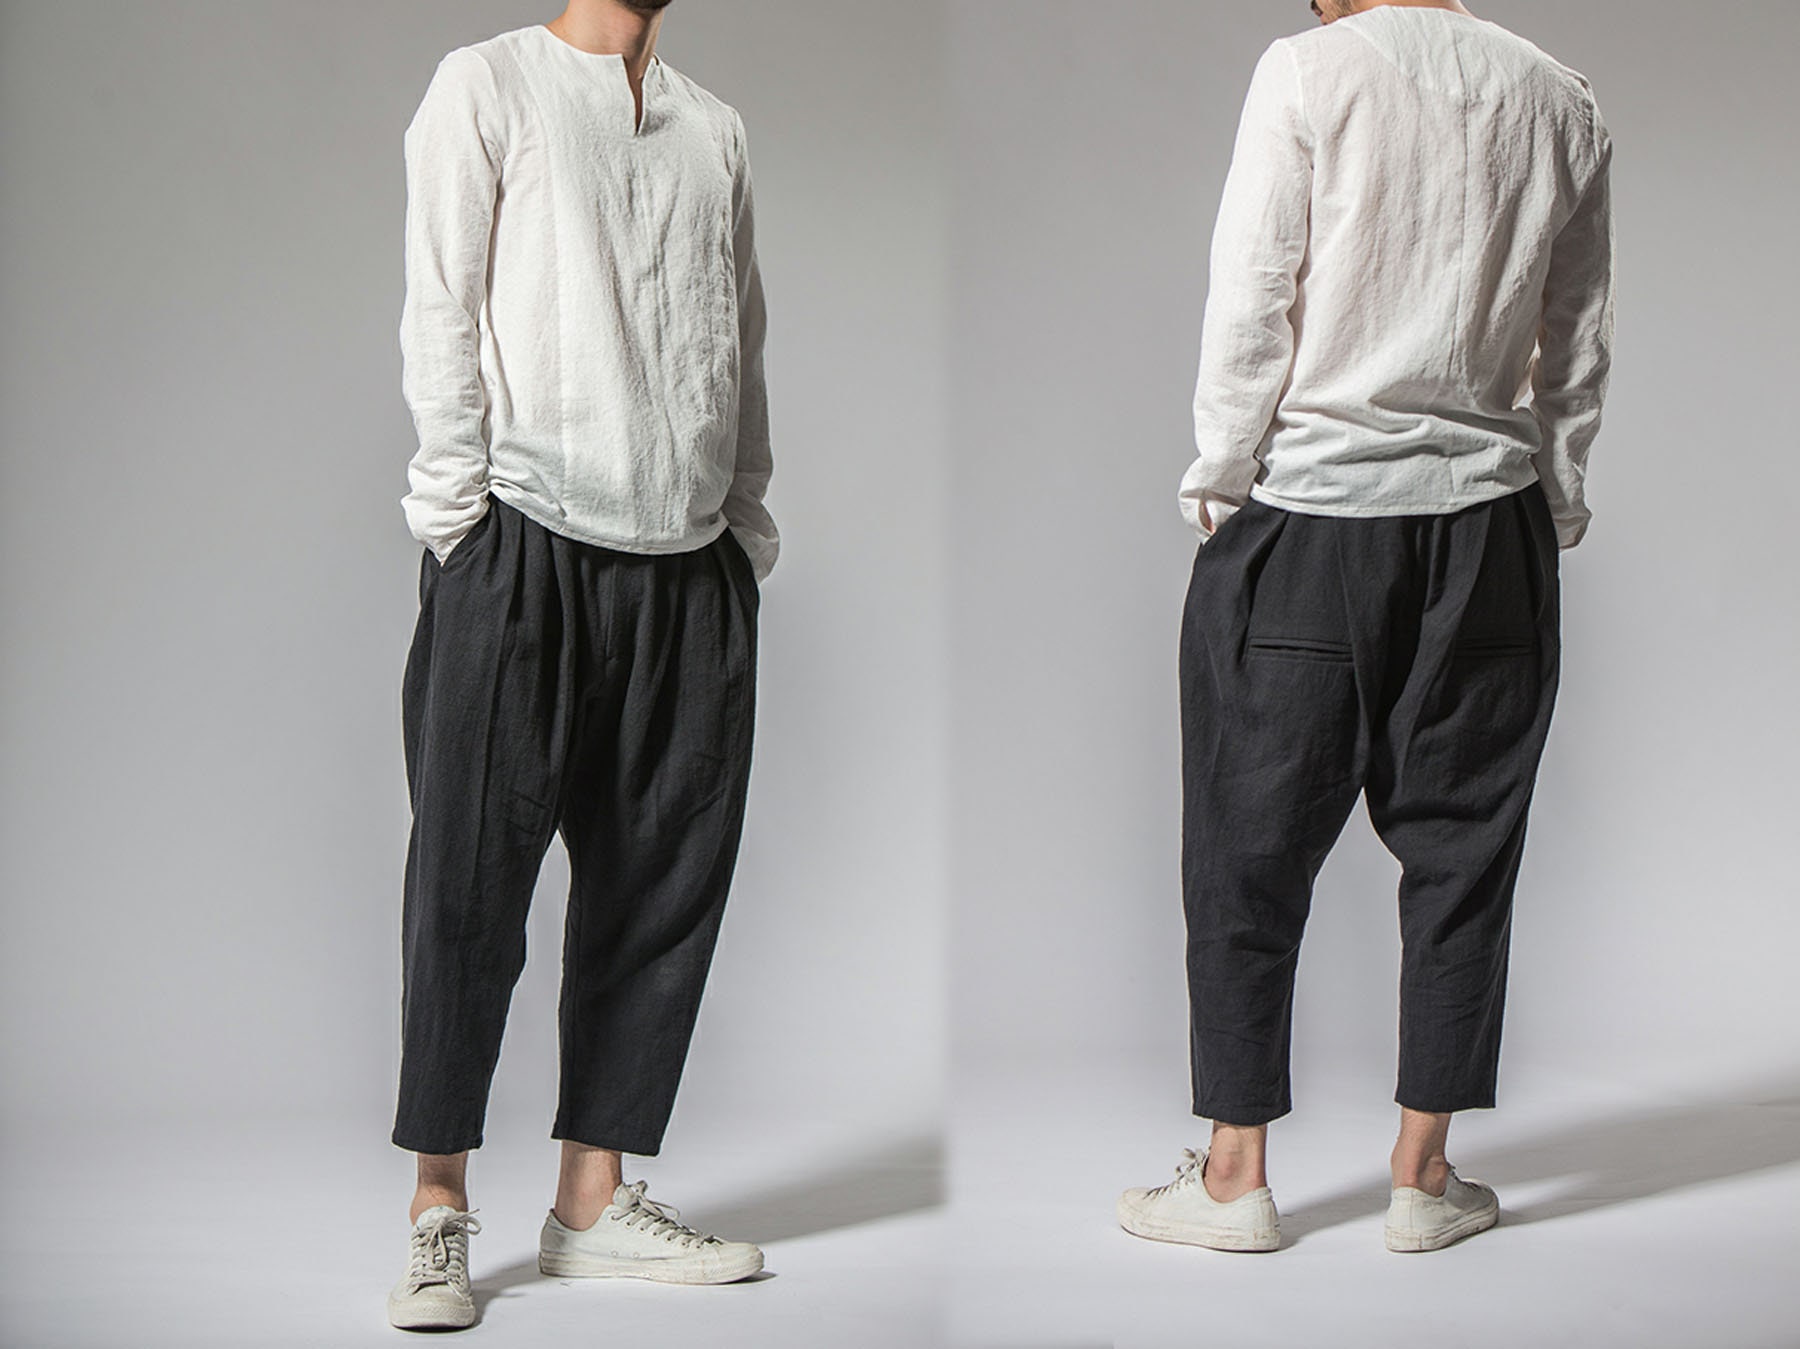 P062Men's Pleated Linen Cotton Blend Pants/Trousers, in Charcoal Color, Drop Crotch, Crop Pants, Harem Made To Order